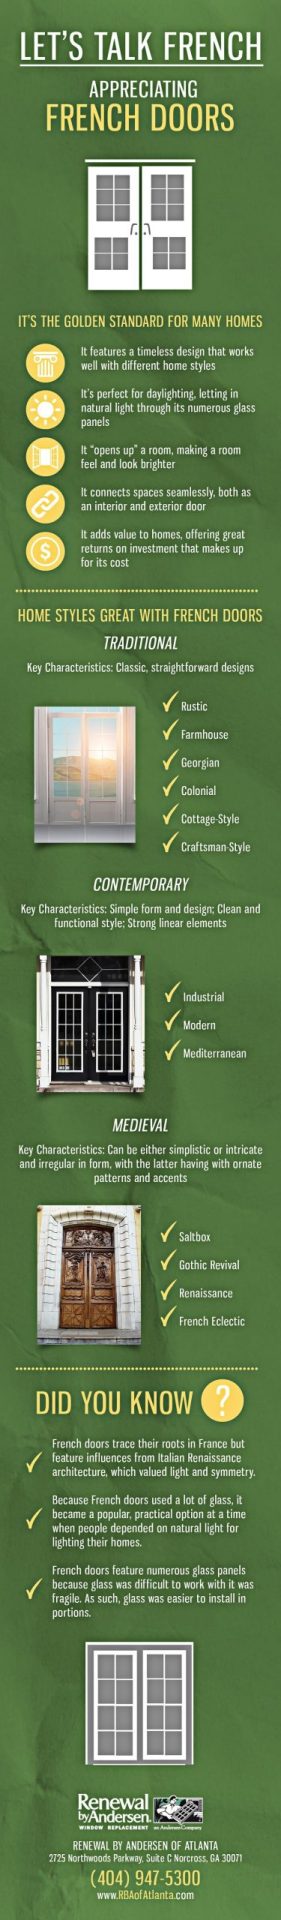 Let's Talk French Appreciating French Doors